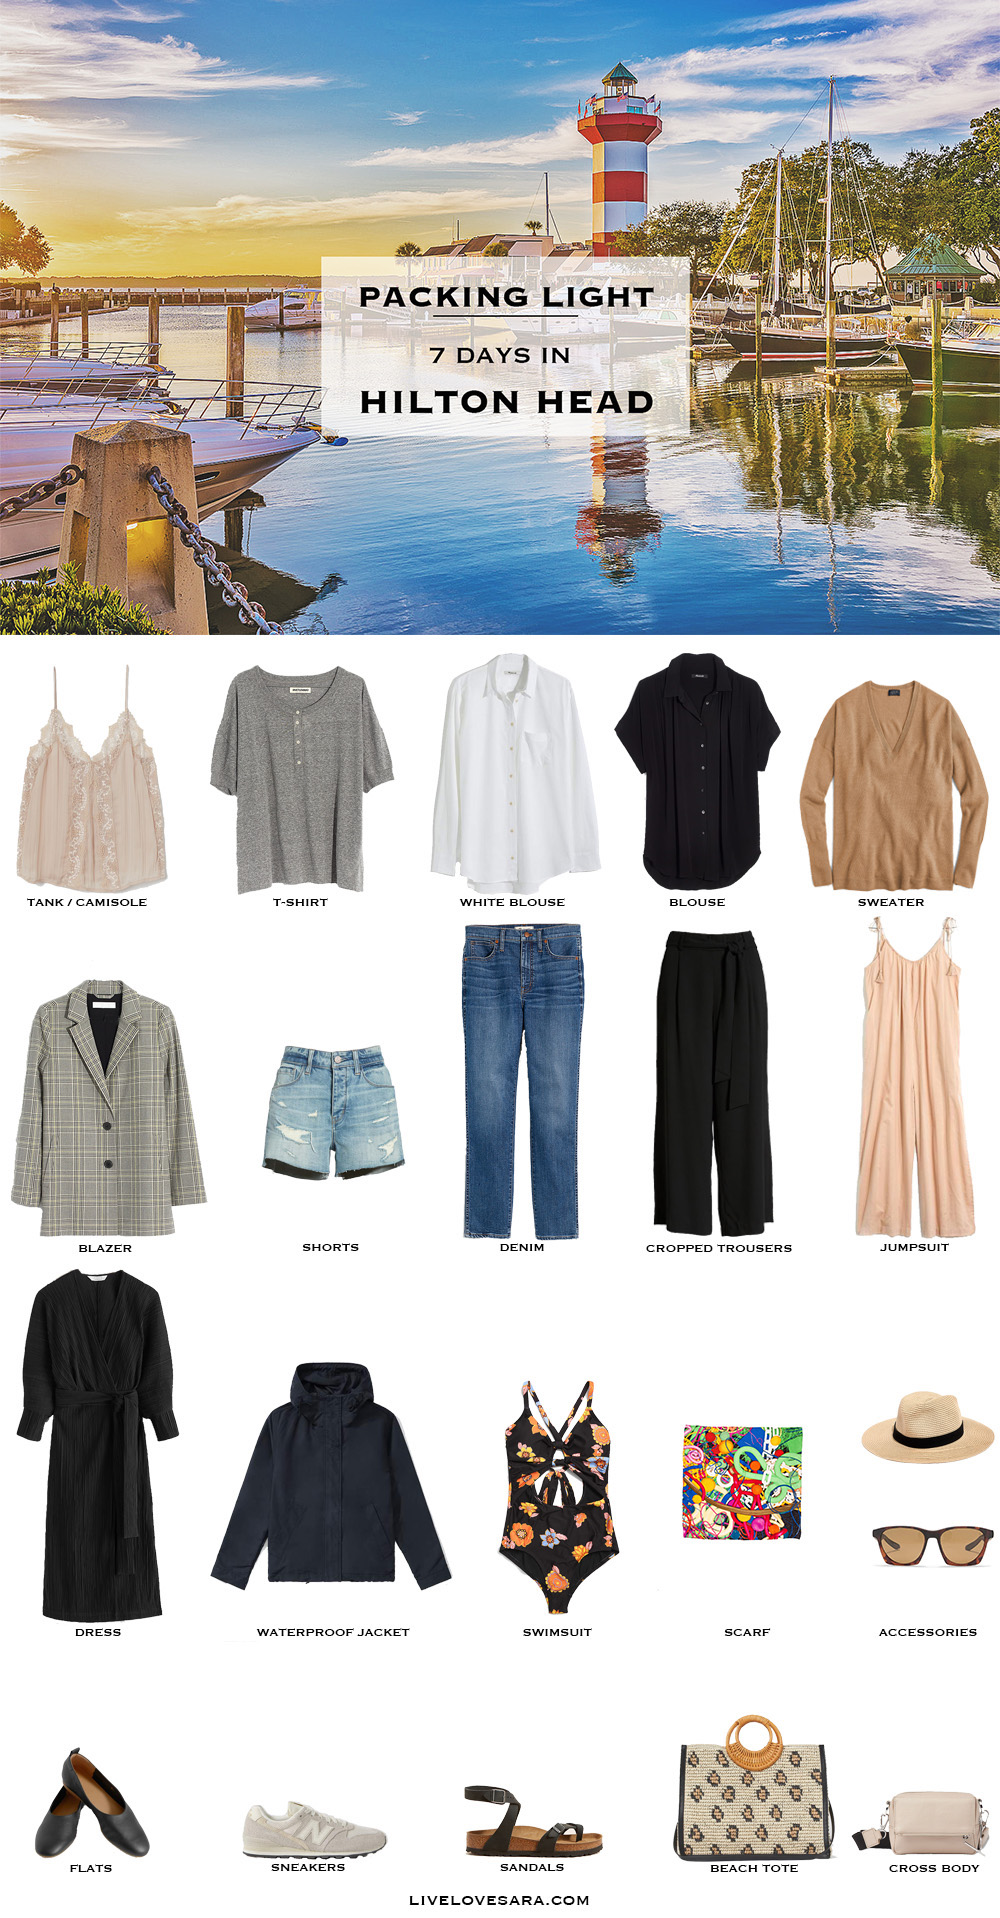 What to pack for Hilton Head packing list | Hilton Head Outfit Ideas | What to Wear in Hilton Head | South Carolina Packing list | Spring Packing List | South Carolina Outfit Ideas | What to Wear in the South Carolina | Packing Light | Capsule Wardrobe | travel wardrobe | Summer packing list | travel capsule | livelovesara